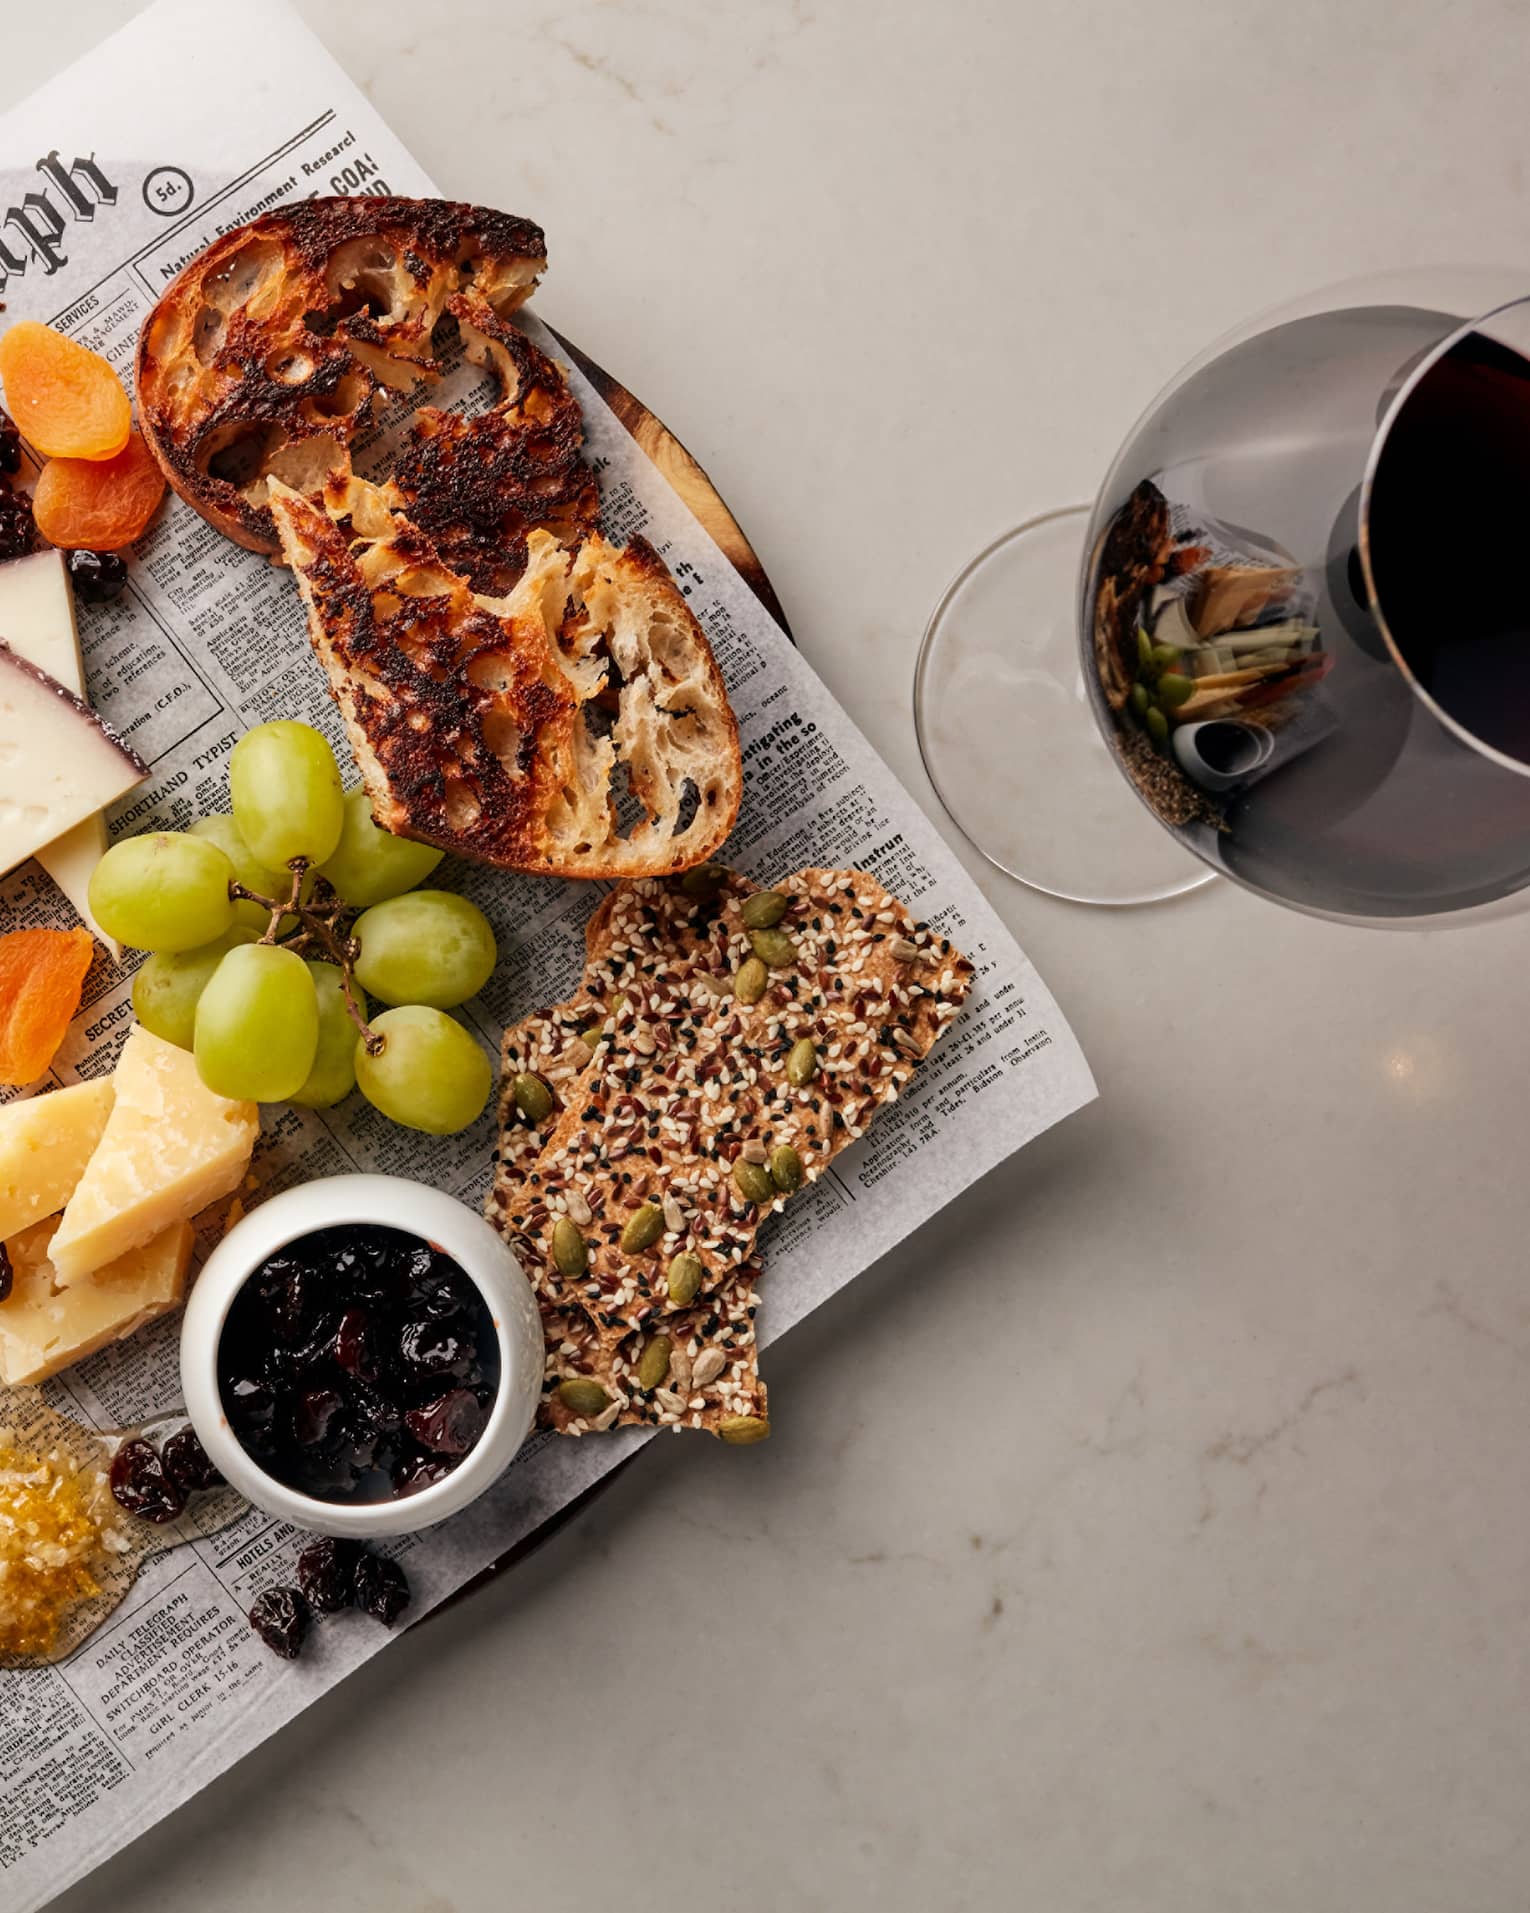 Cheese, grapes, crackers and bread on newspaper on platter next to glass of red wine